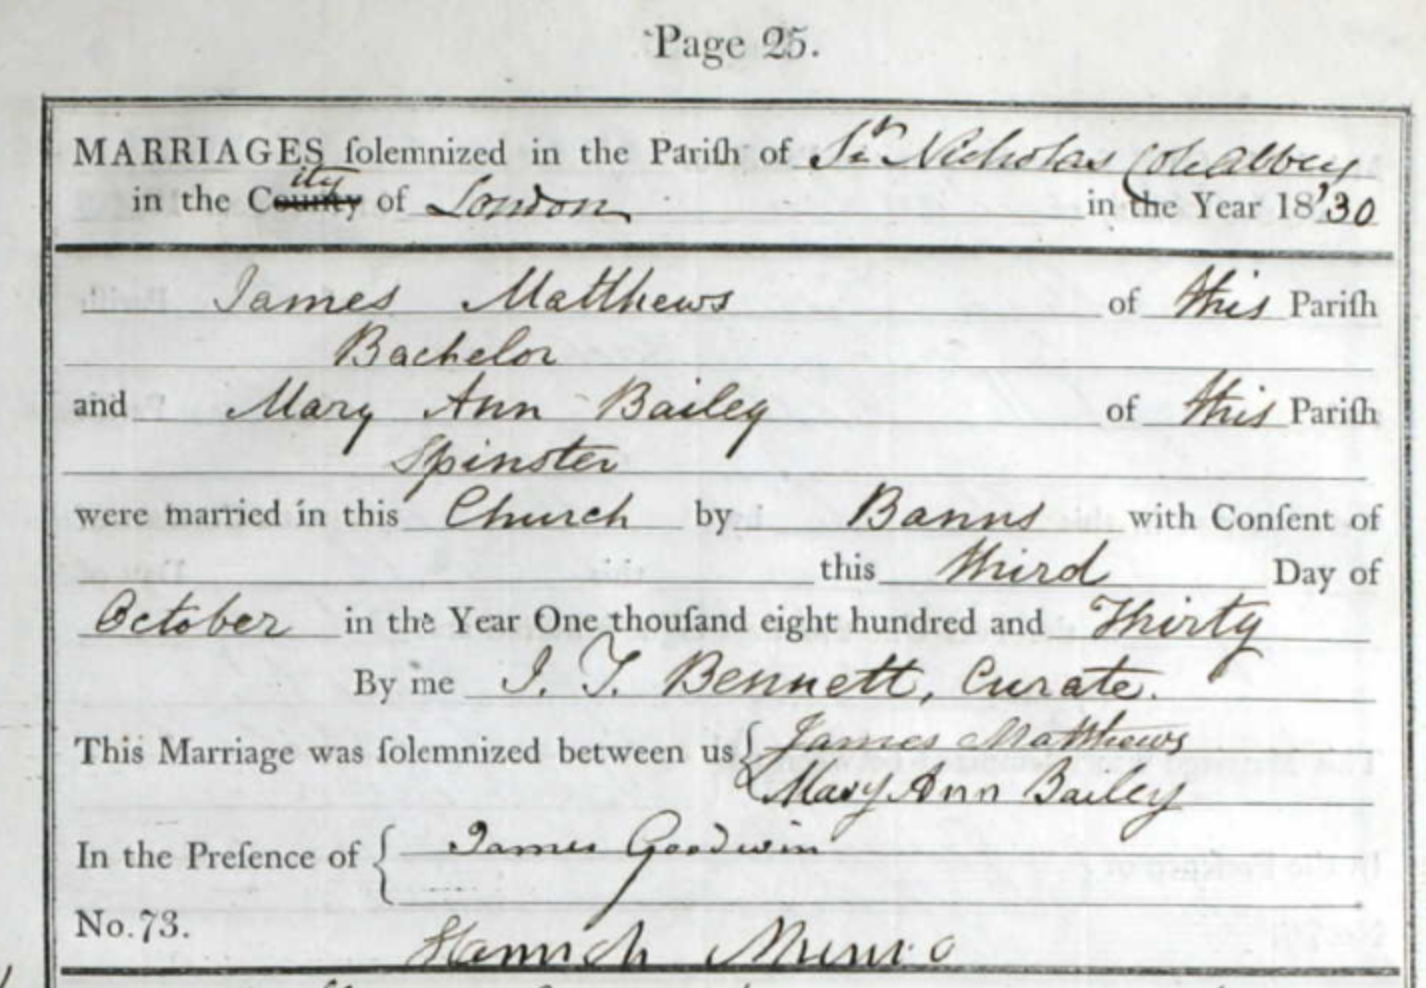 Marriage of James Matthews and Mary Ann Bailey